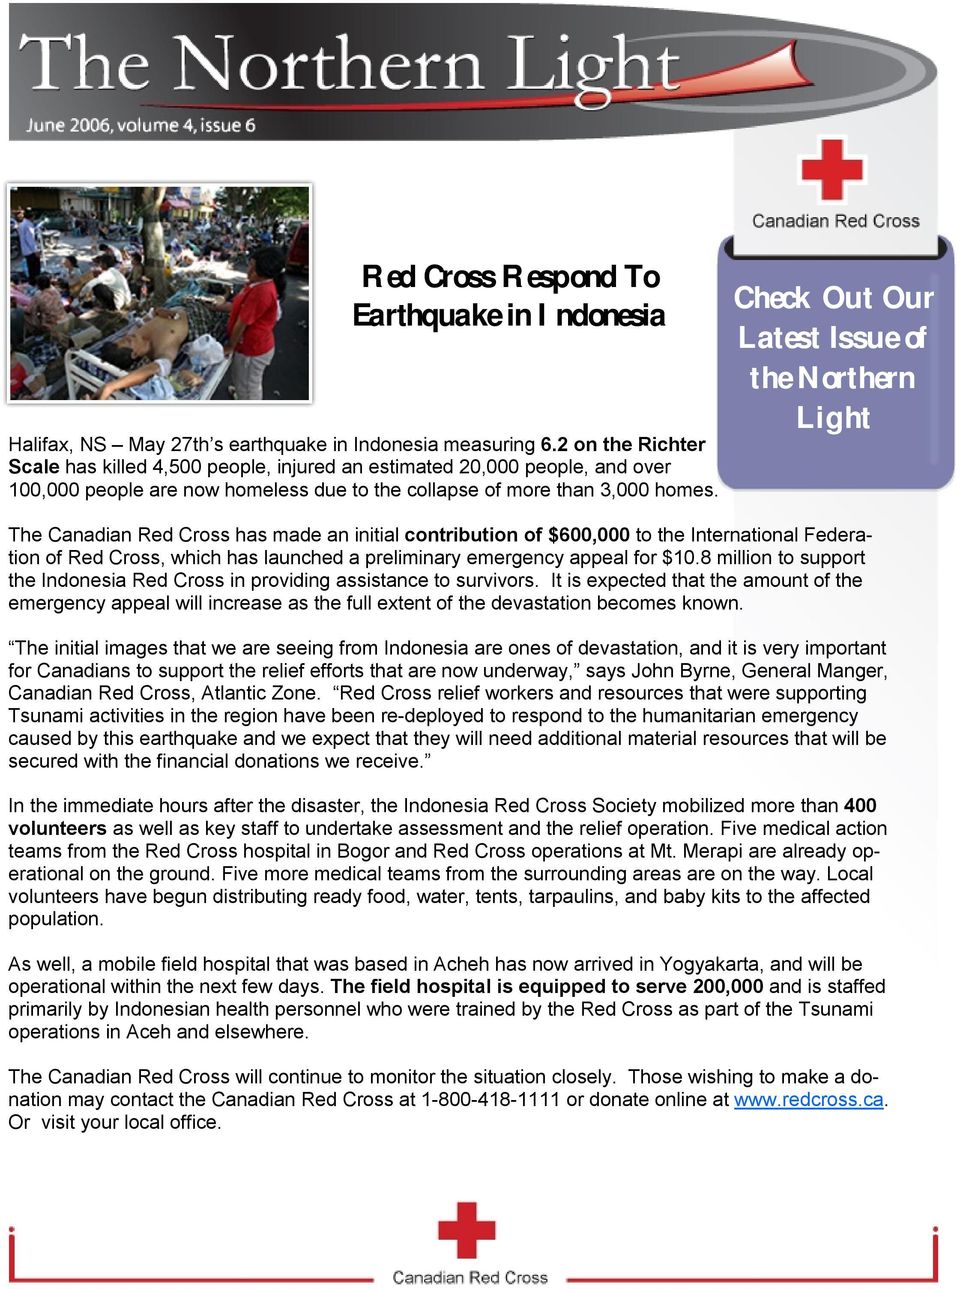 Check Out Our Latest Issue of the Northern Light The Canadian Red Cross has made an initial contribution of $600,000 to the International Federation of Red Cross, which has launched a preliminary